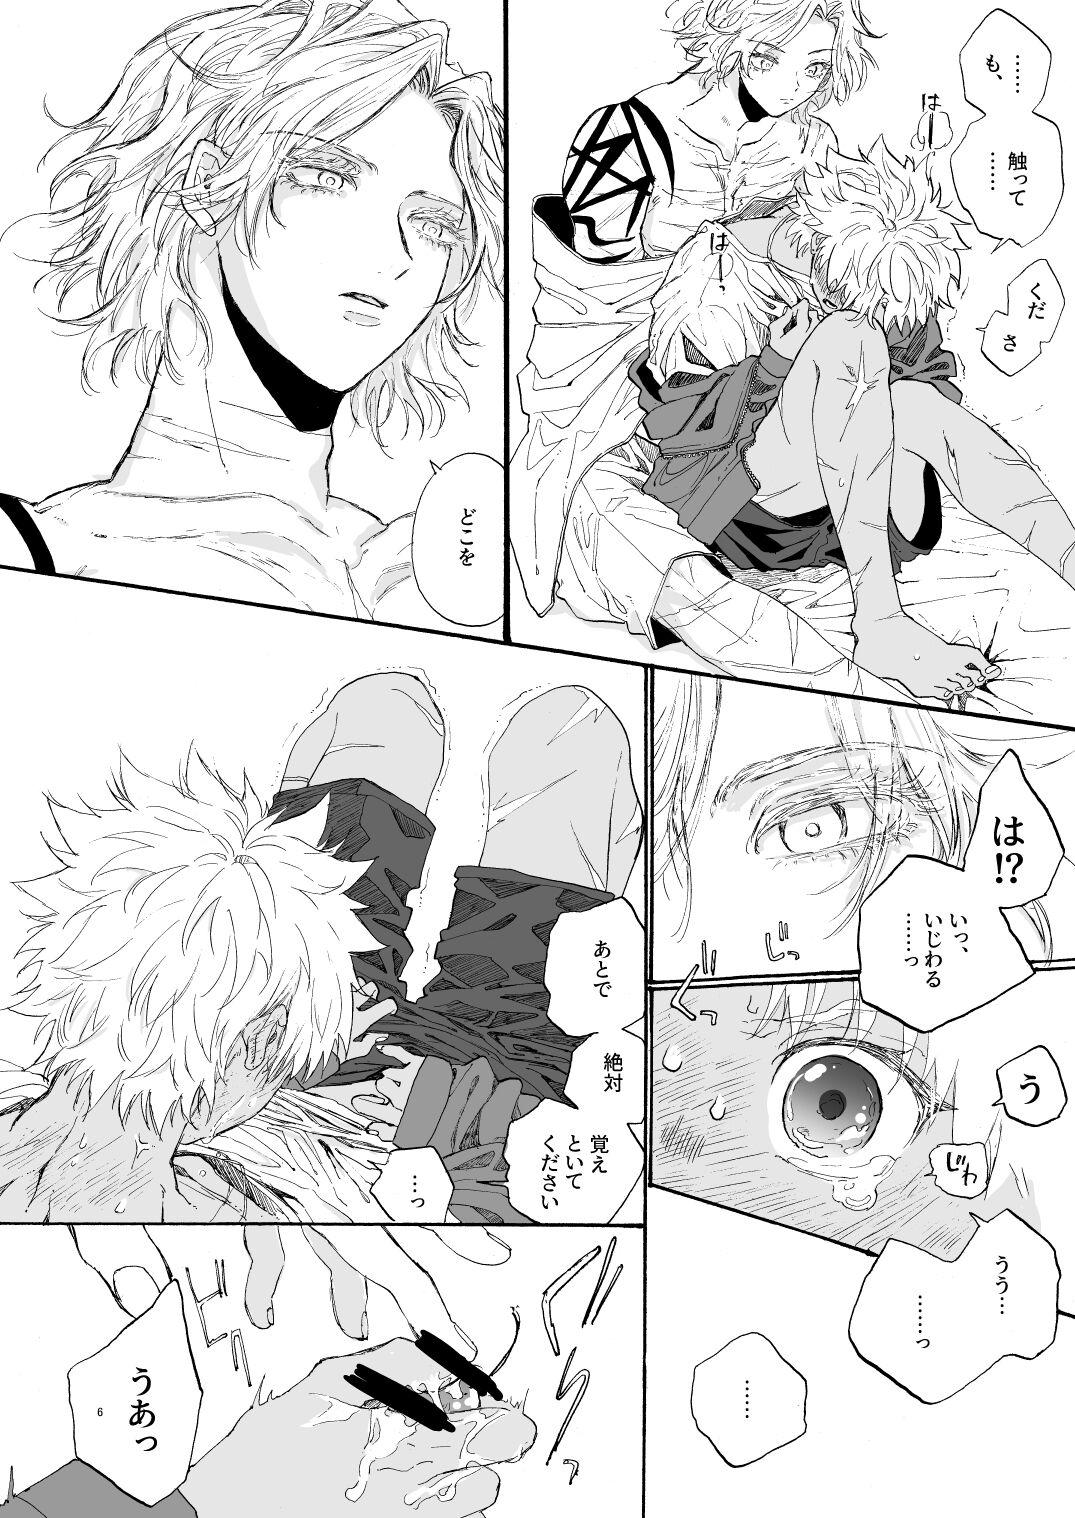 Blond Sotsugyou - Fate grand order Nerd - Page 7